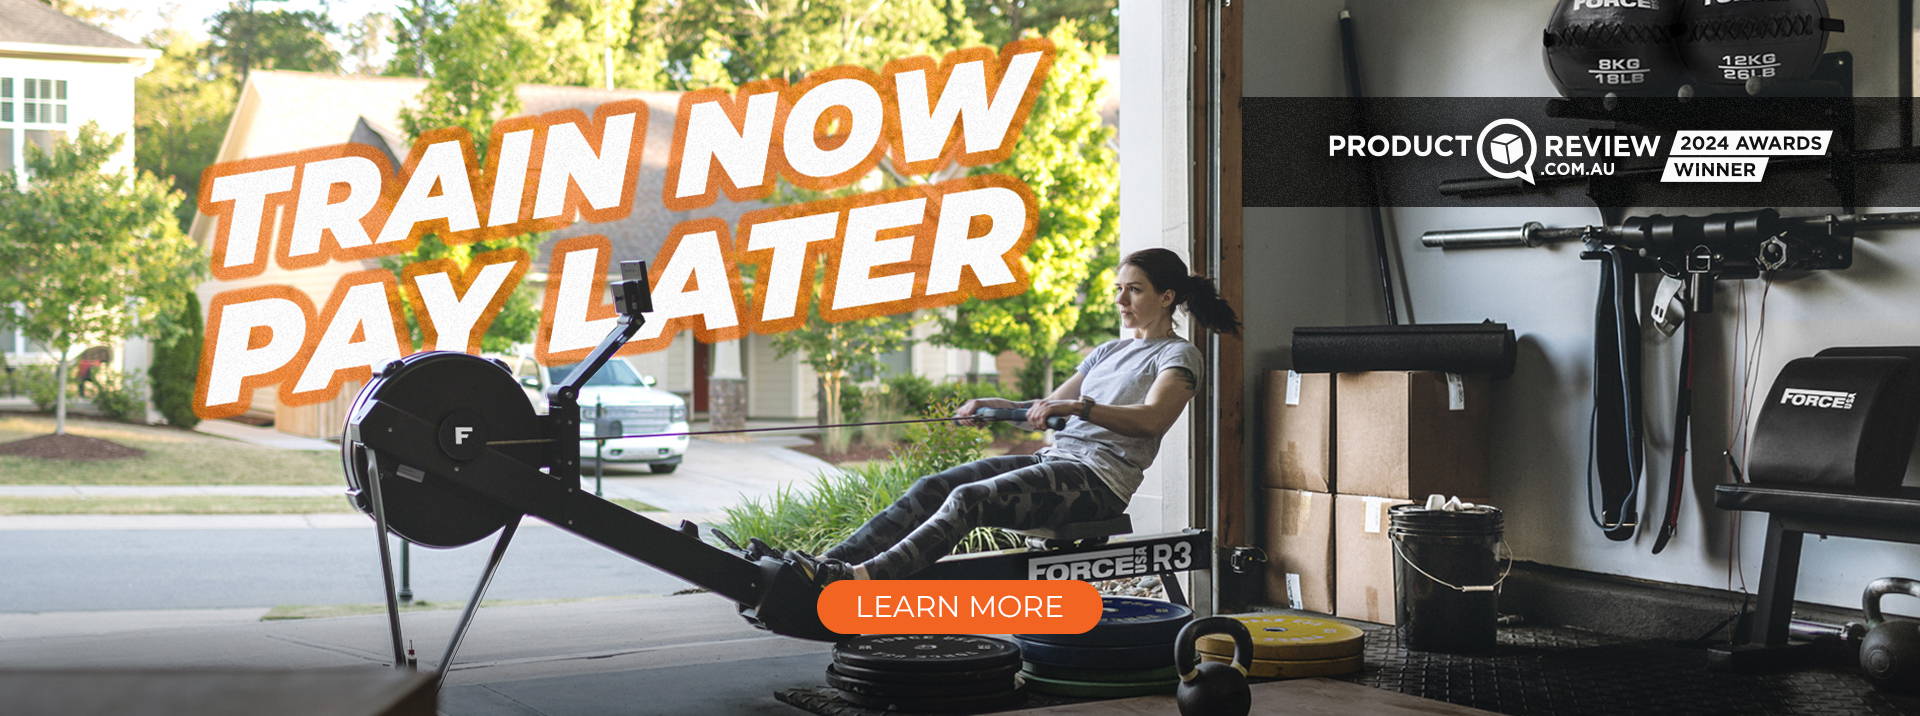 A woman is working out using a Force USA rowing machine in a home garage turned into a gym, with various gym equipment visible in the background. The large text overlay reads 'TRAIN NOW, PAY LATER' in a bold, orange font. On the right side of the image, there's a black badge stating 'PRODUCT REVIEW 2024 AWARDS WINNER' with the logo of productreview.com.au,